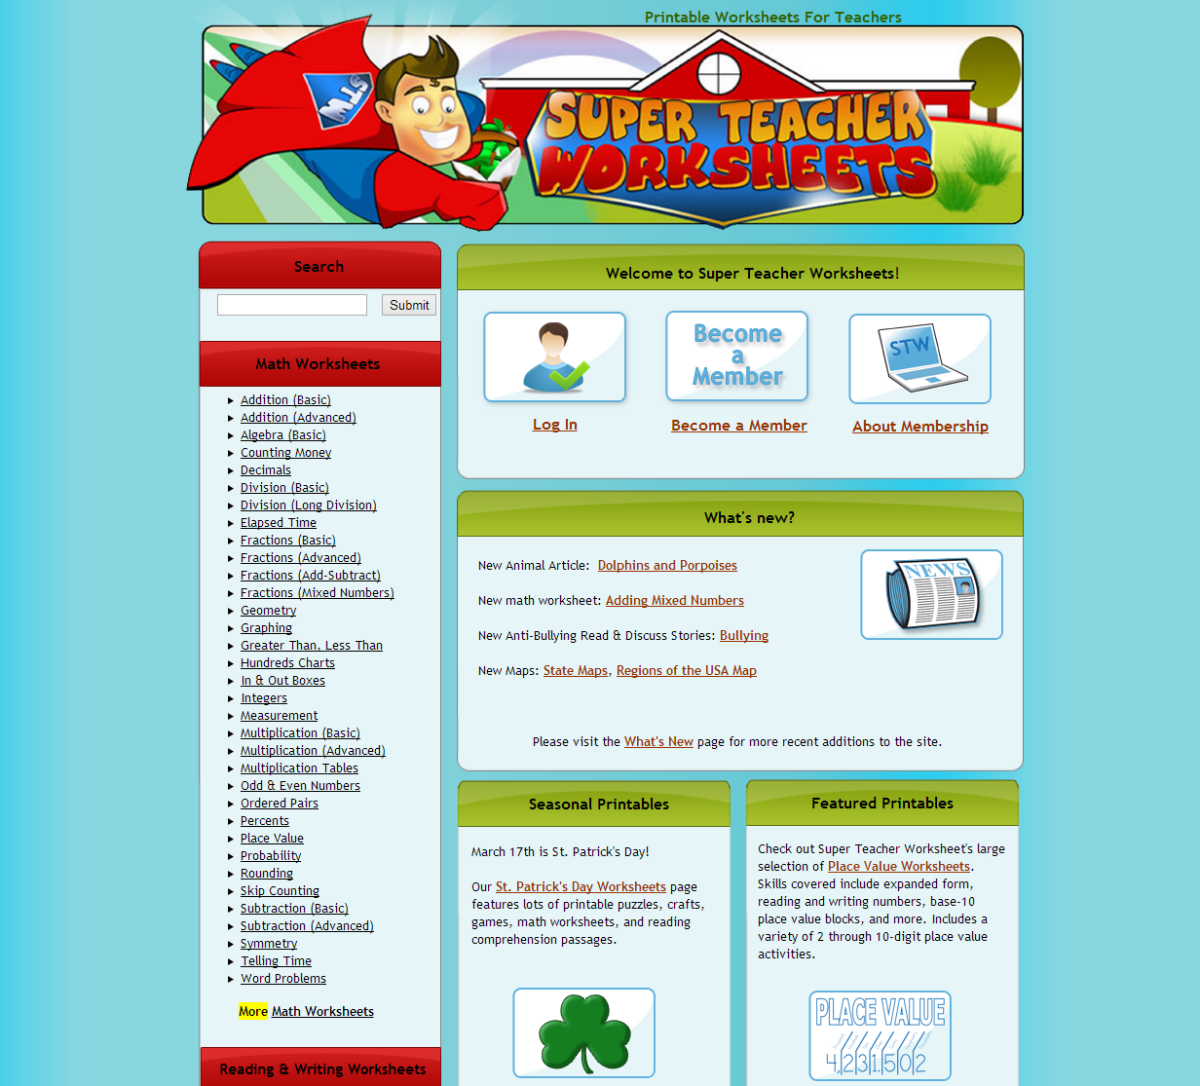 This is a screenshot of the site, Super Teacher Worksheets, which I highly recommend. 